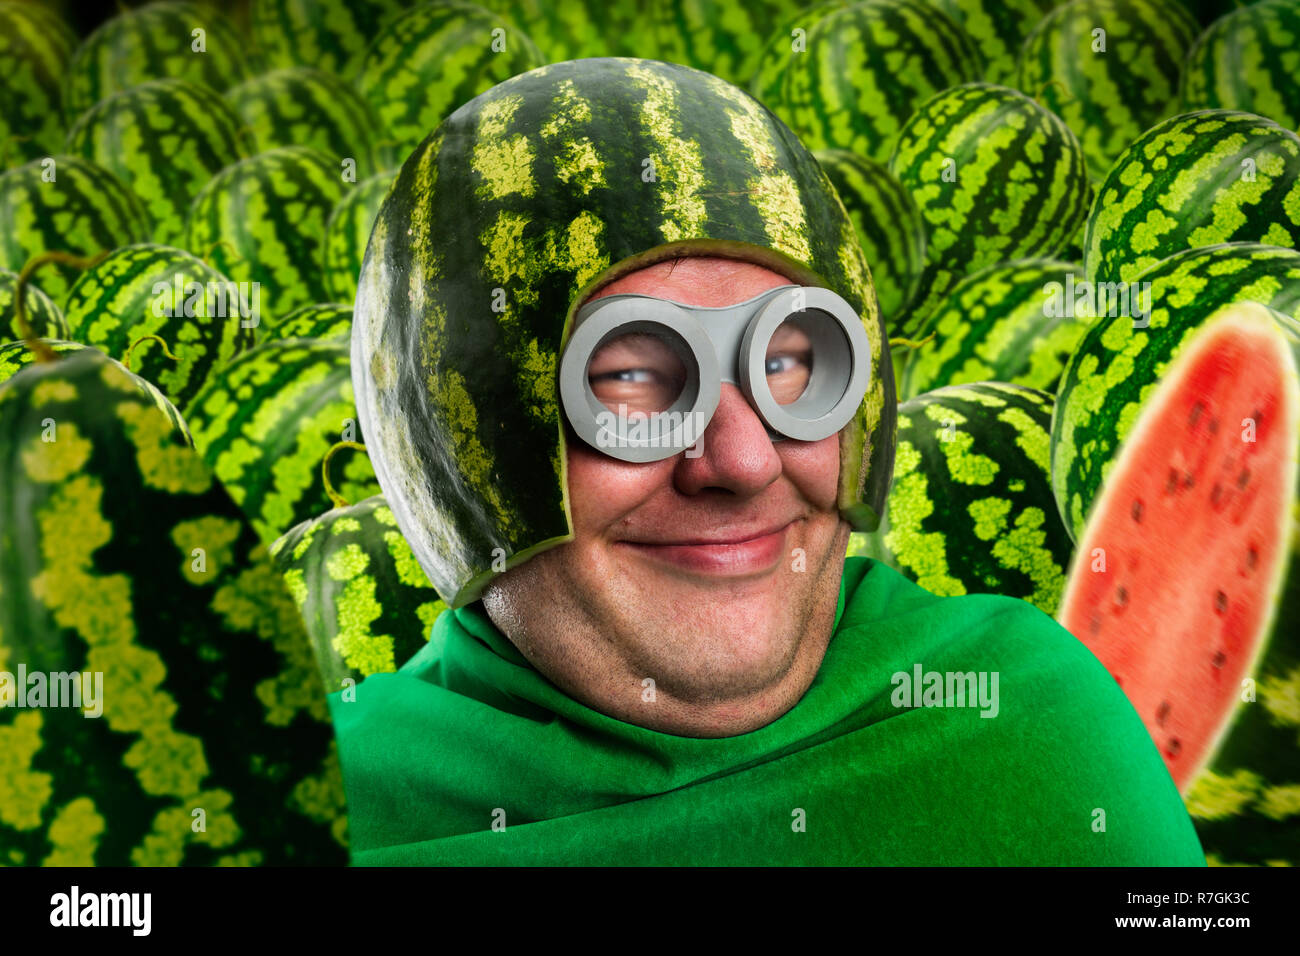 Crazy man in watermelon helmet and googles, parasitic caterpillar or worm, fruit instead of head Stock Photo